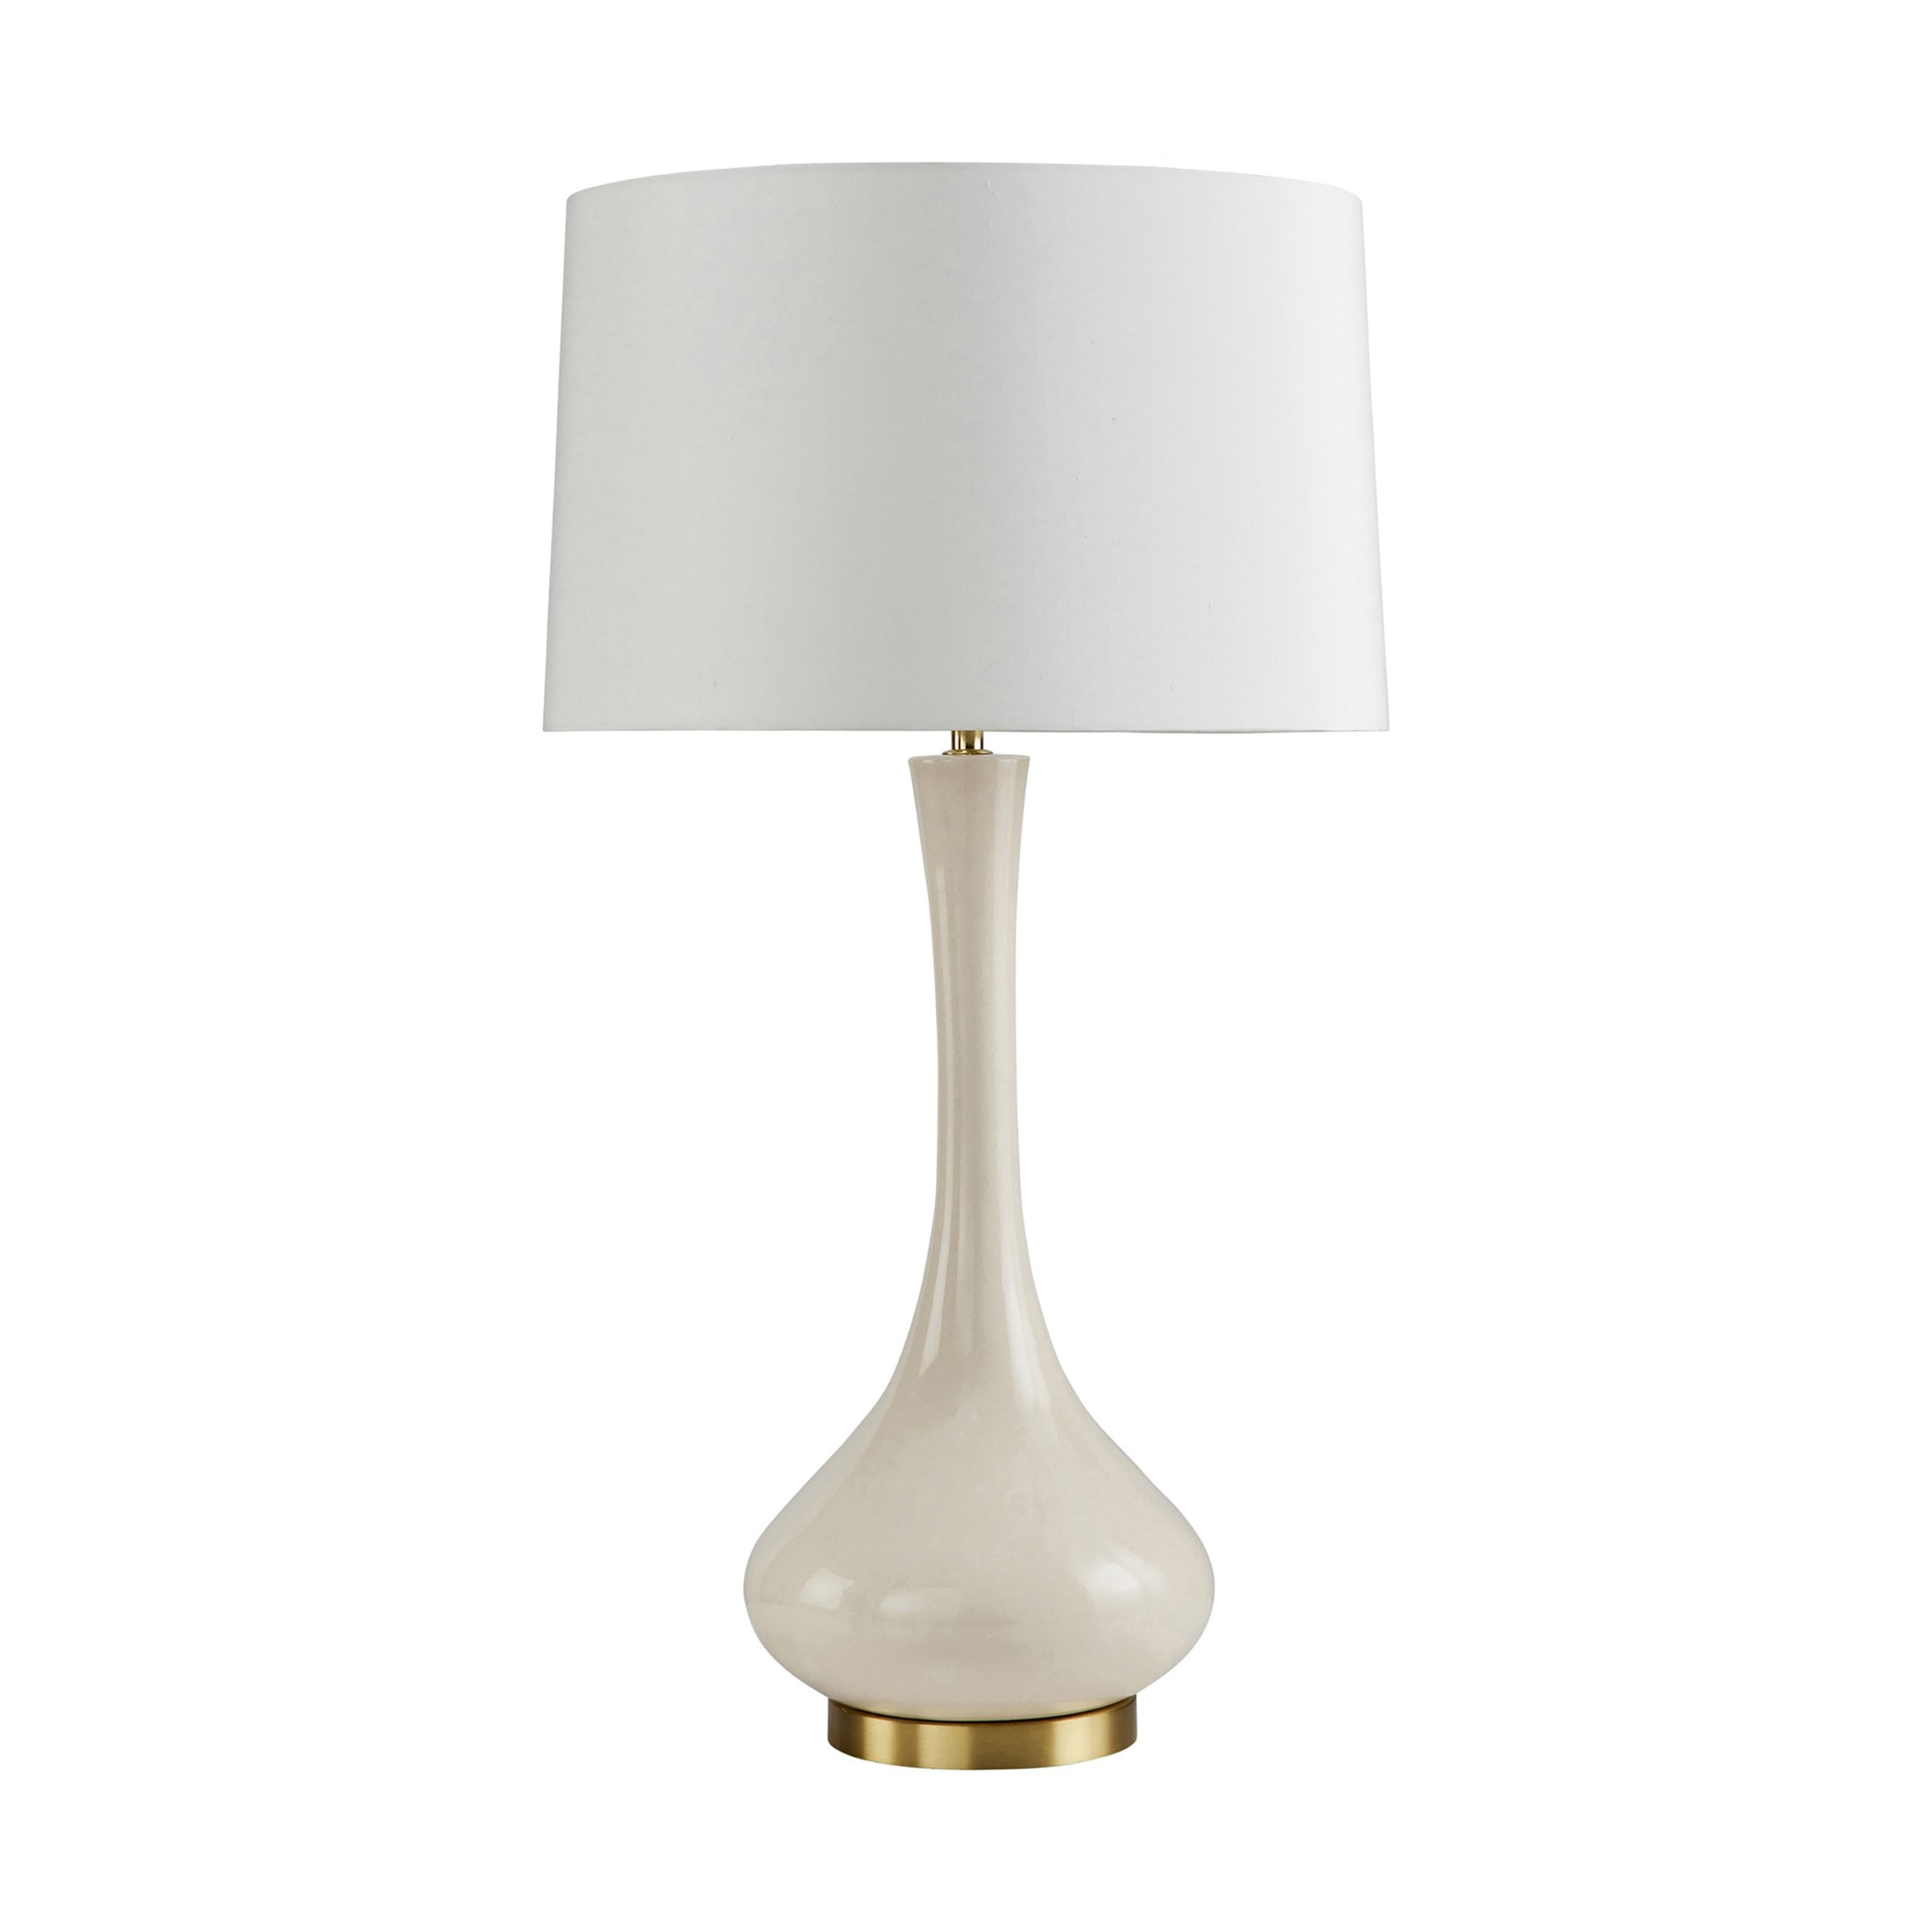 Amelia Table Lamp with Acrylic Base and Empire Shade.